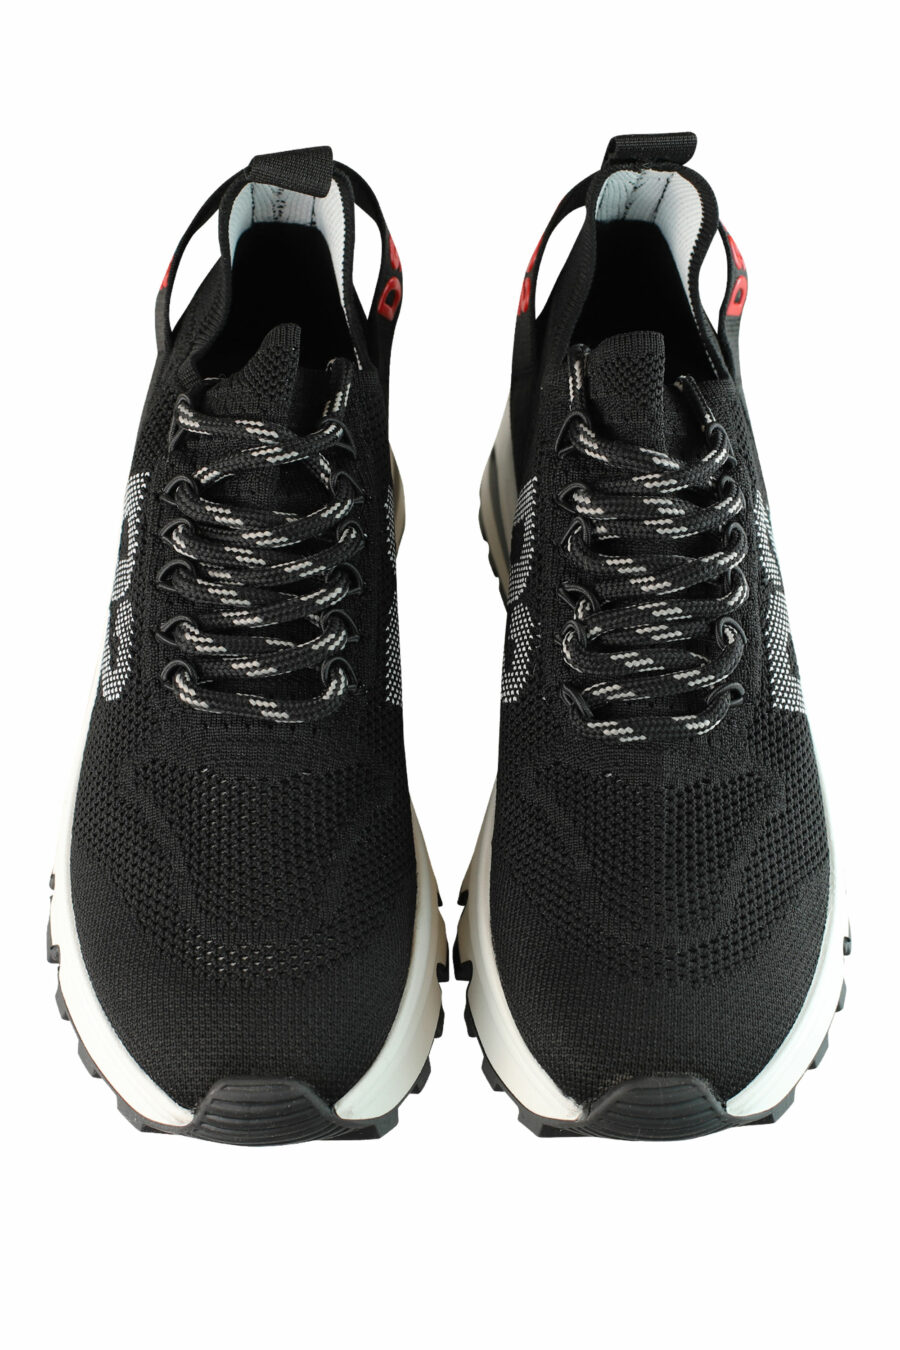 Black "Run D2" trainers with red logo - IMG 1367